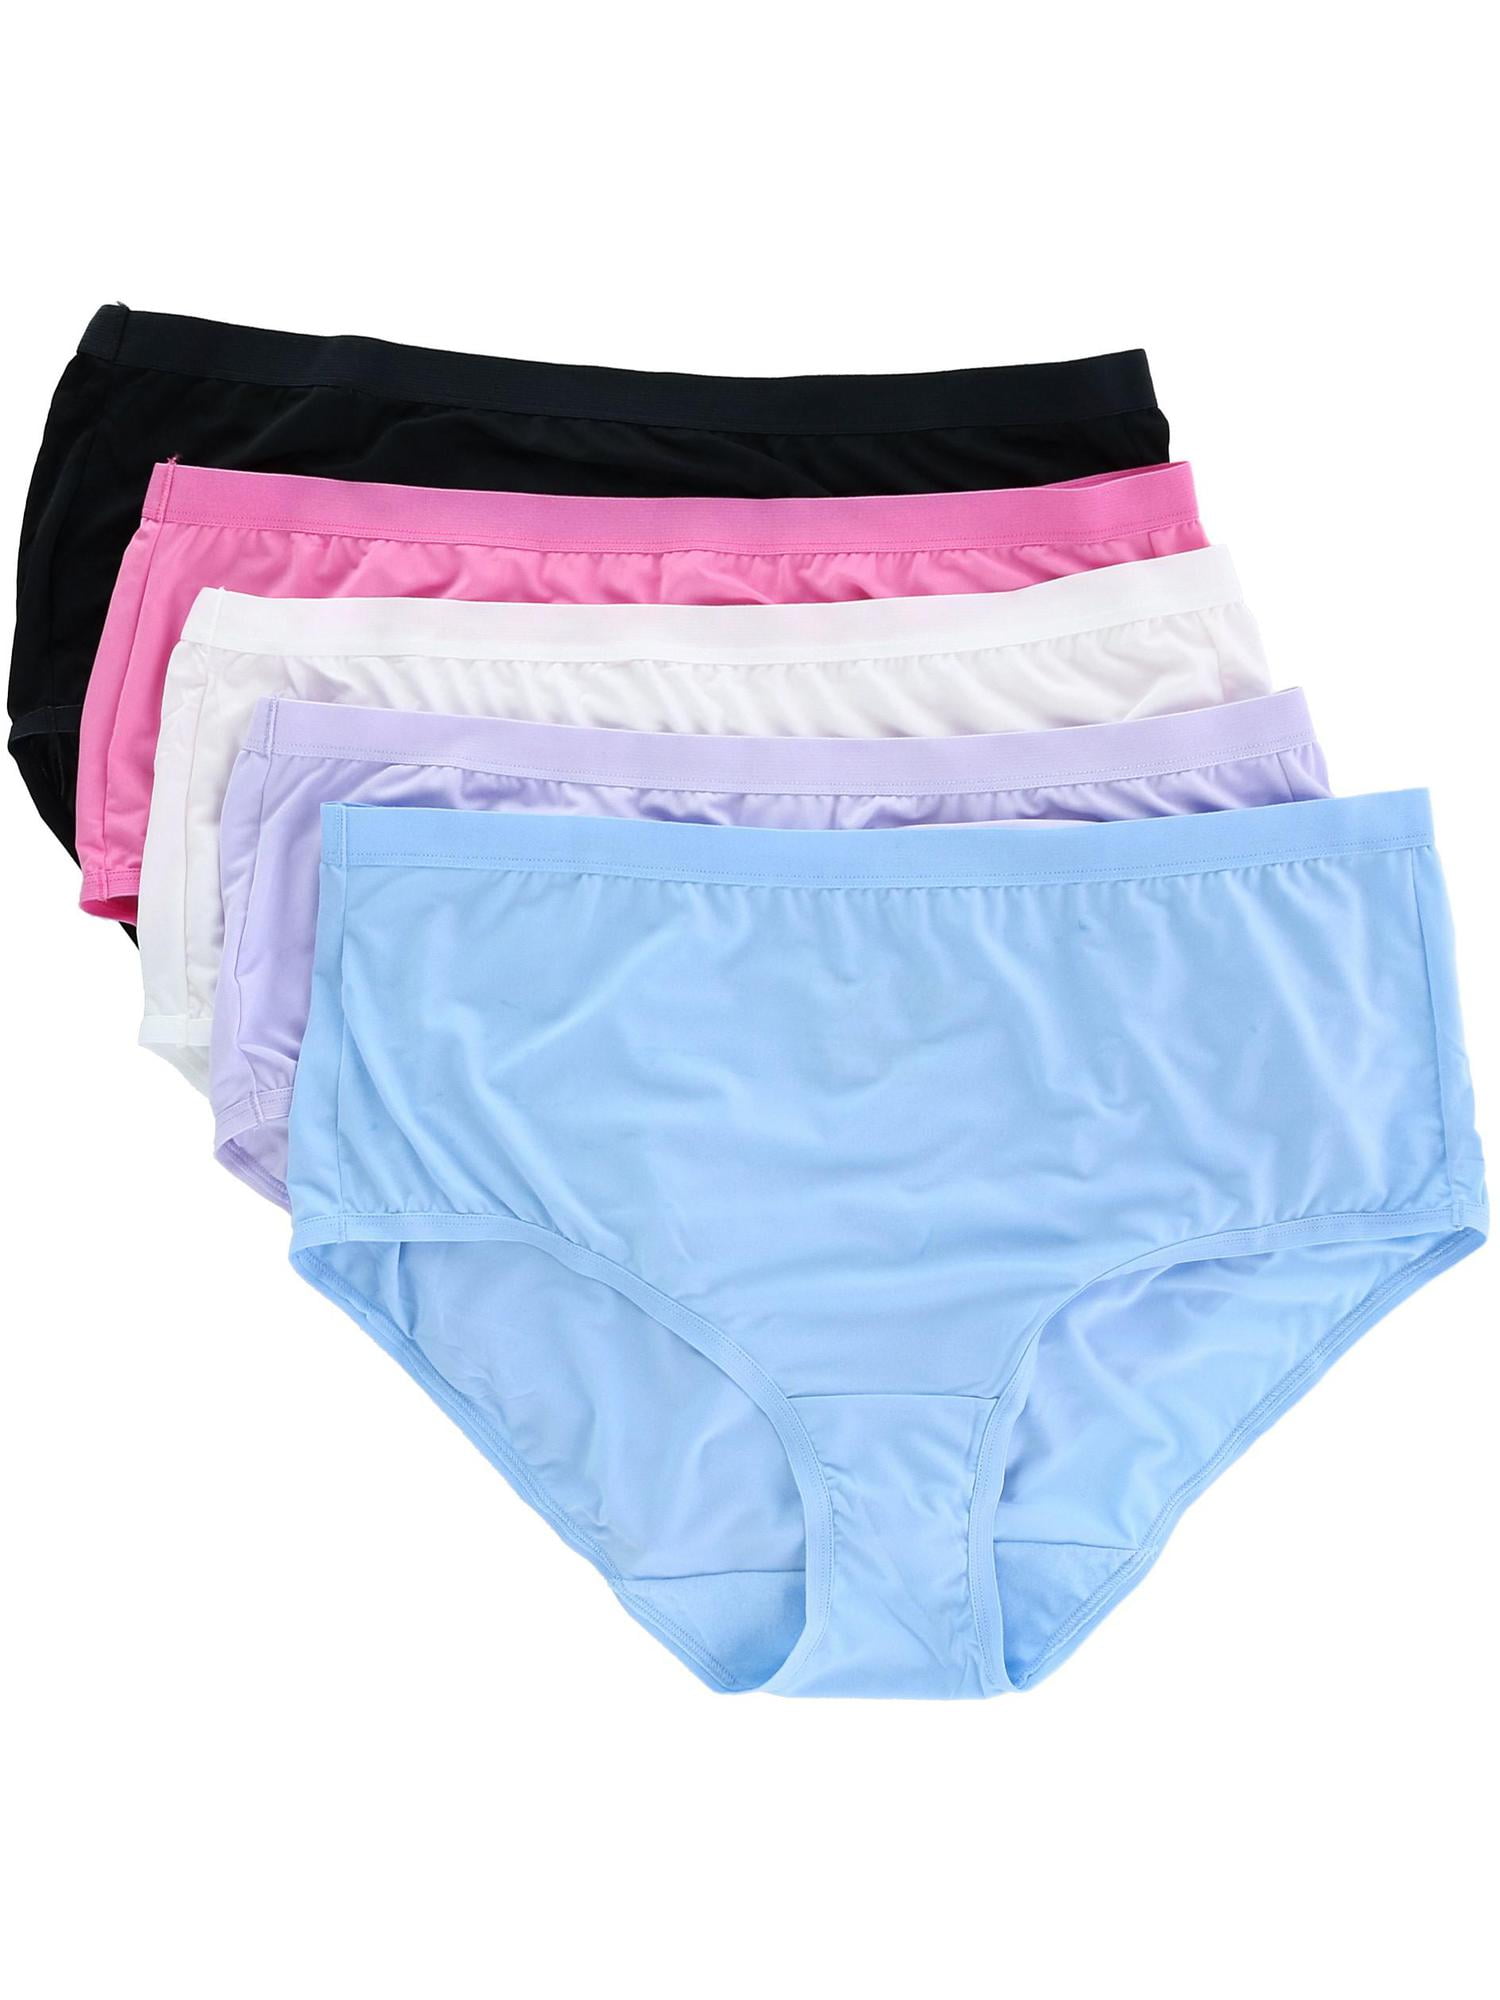 Ladies Plus Fit for Me Microfiber Panty Briefs, Assorted Color - Size 11 -  Pack of 6